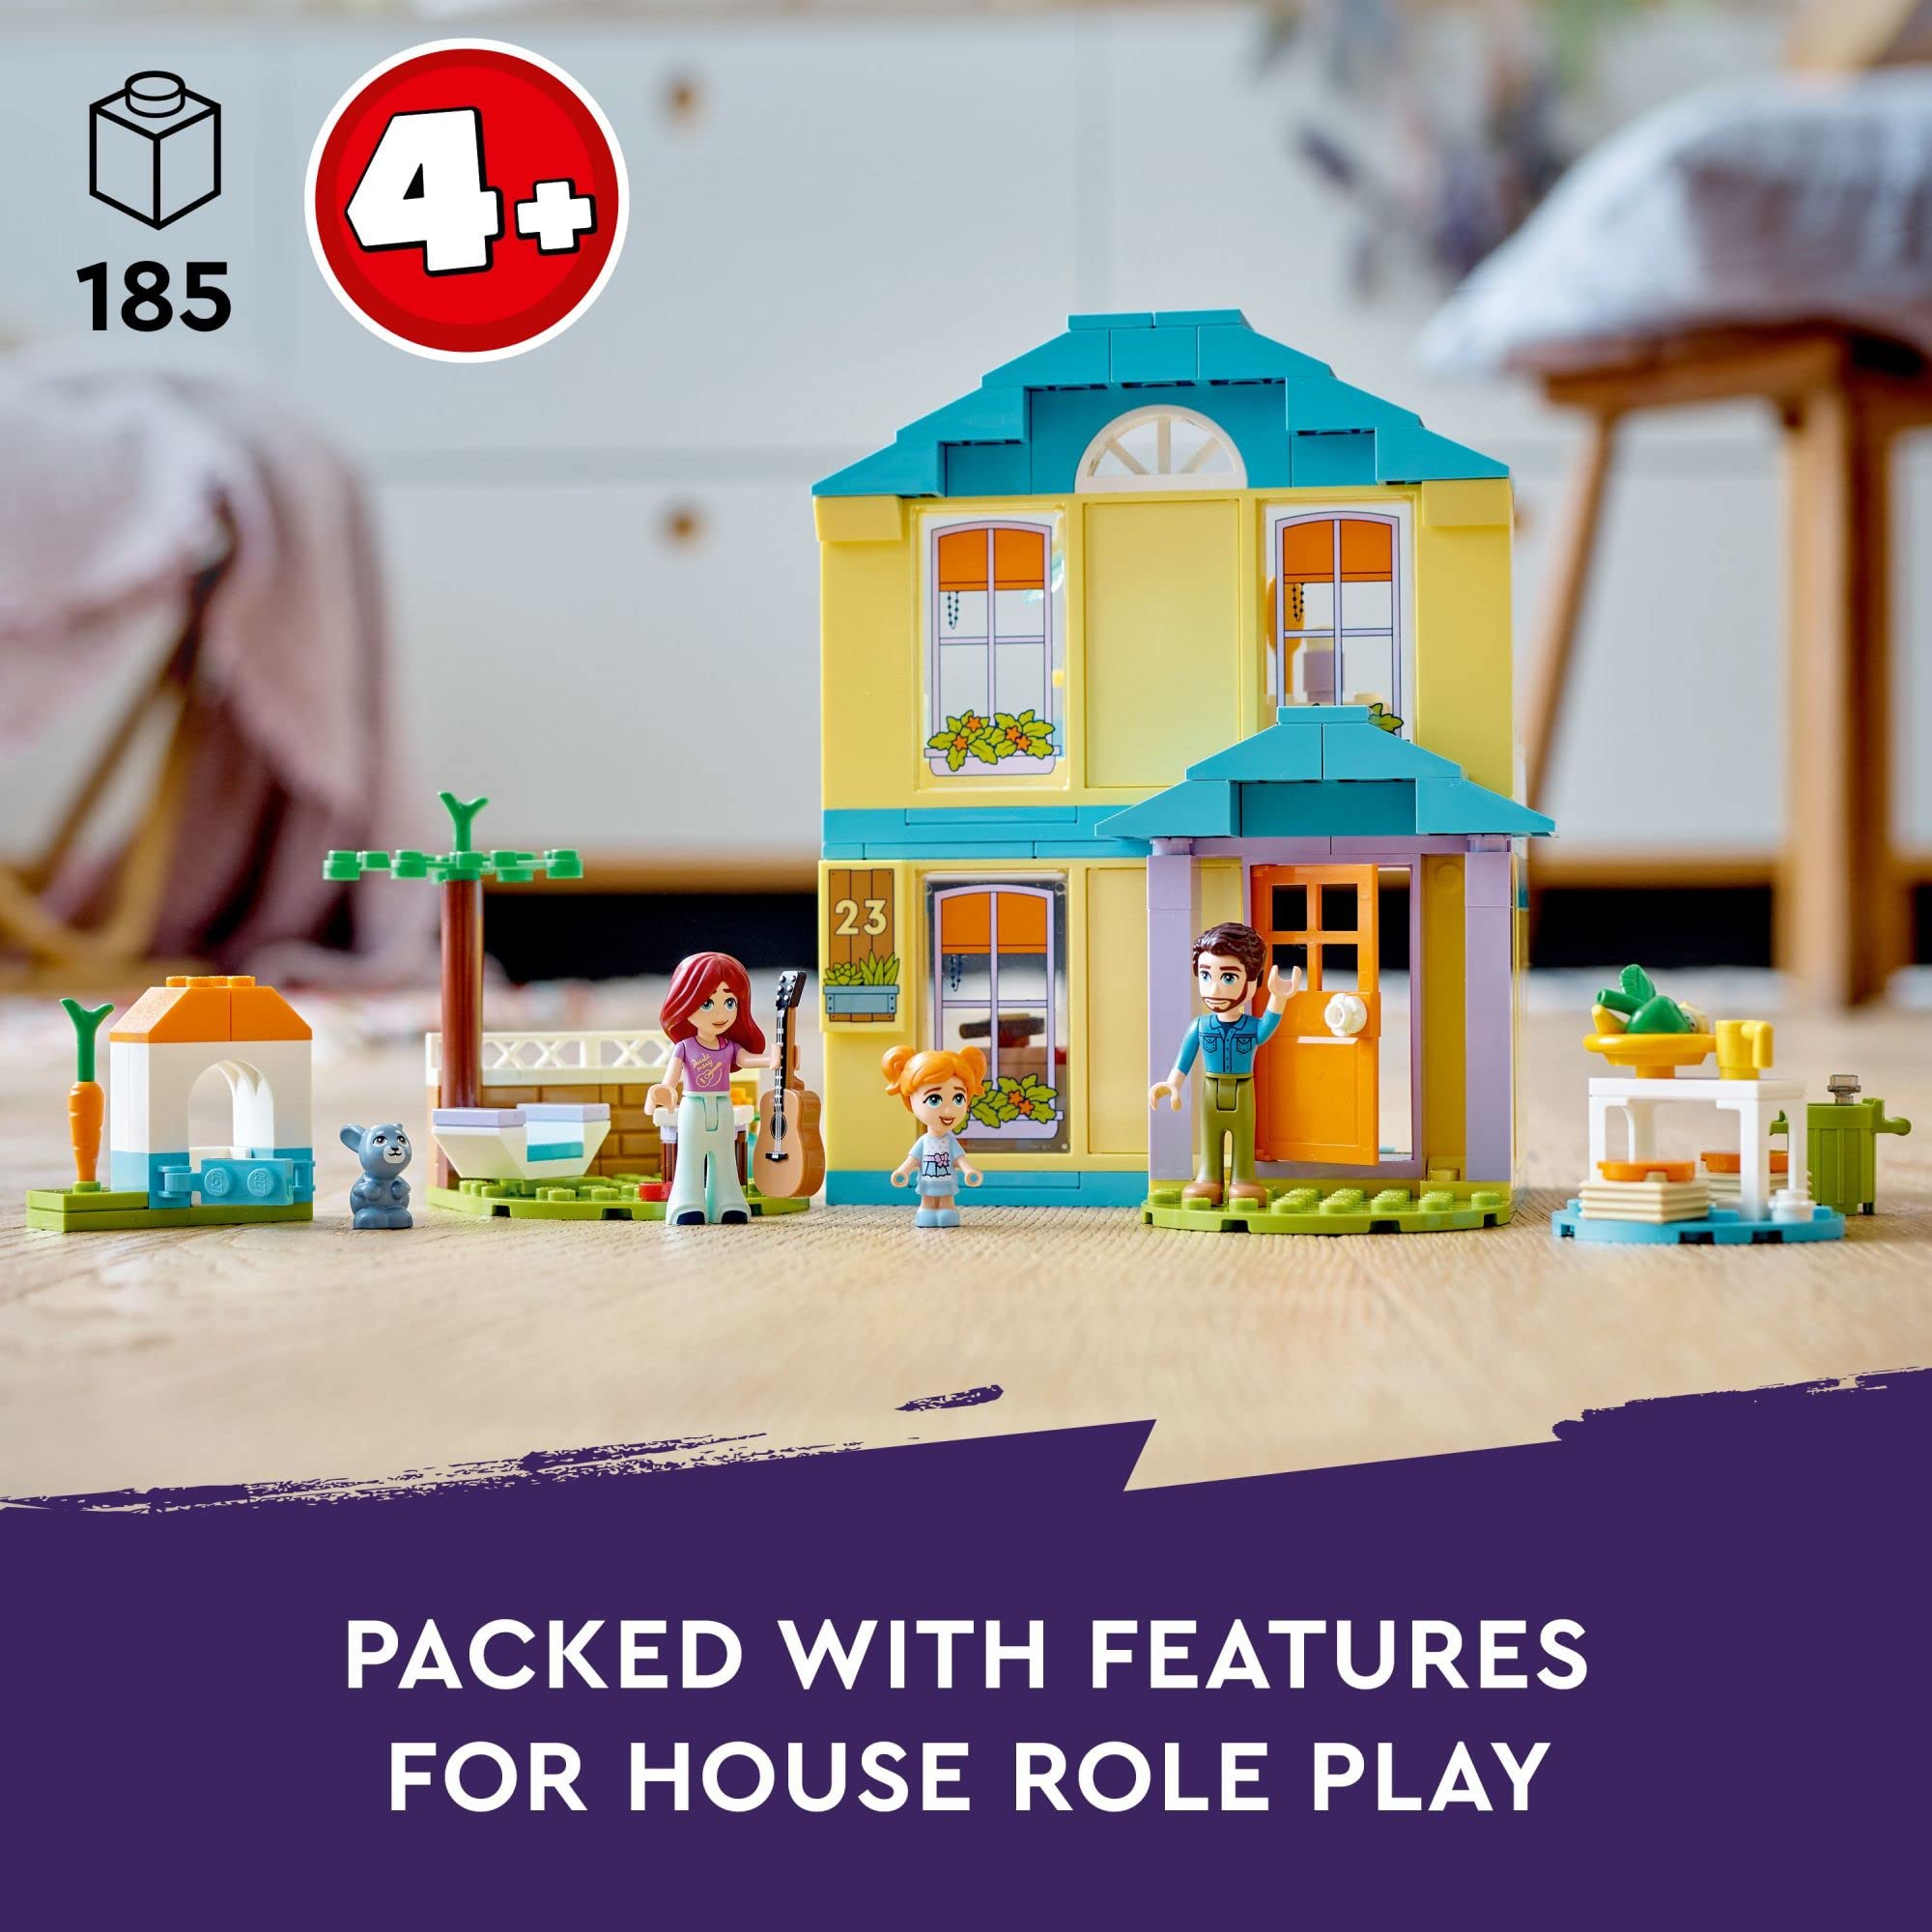 LEGO Friends Paisley’s House 41724, Doll House Toy for Girls and Boys 4 Plus Years Old, Playset with Accessories Including Bunny Figure, Birthday Gift